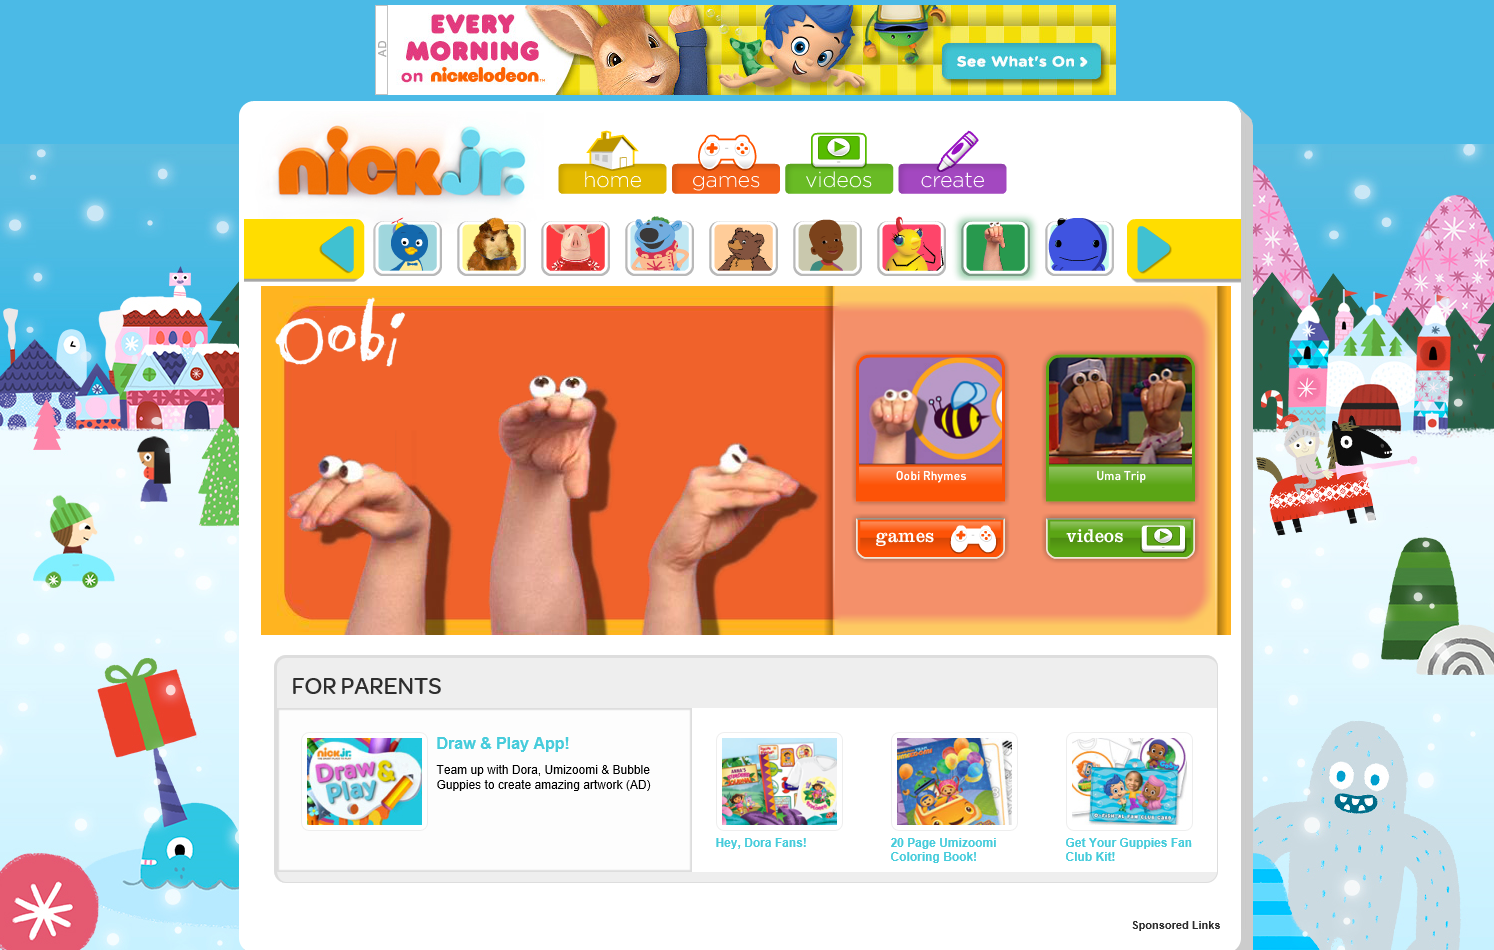 Nick Jr Games To Play Free Online